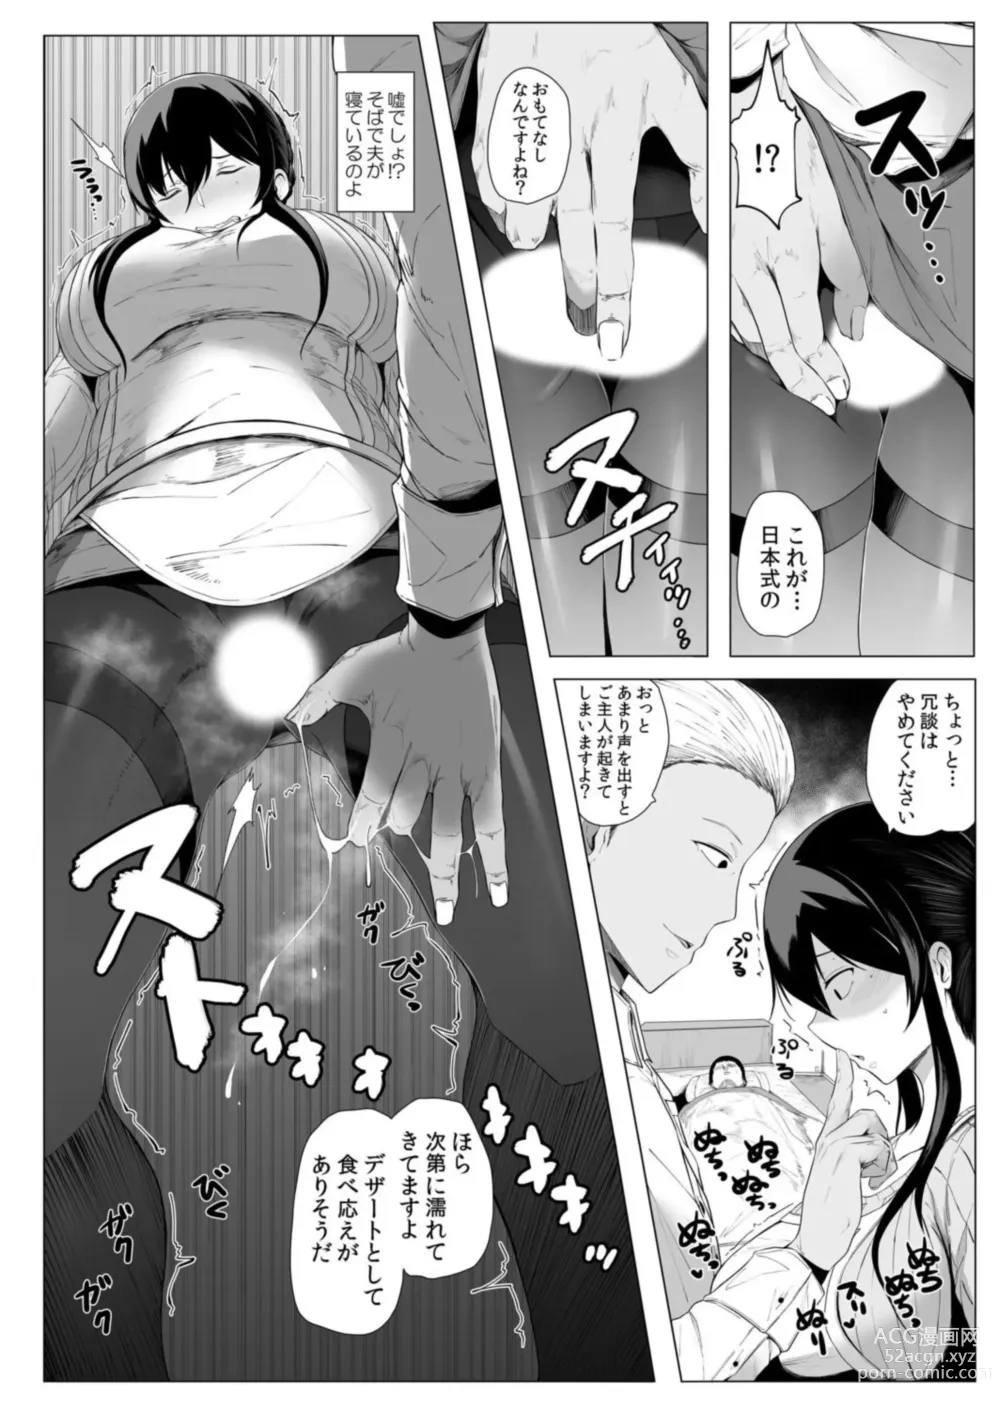 Page 17 of manga Netorare With An Unequaled Foreigner... ~I Fall Into Non-Standard SEX Bigger Than Him 2